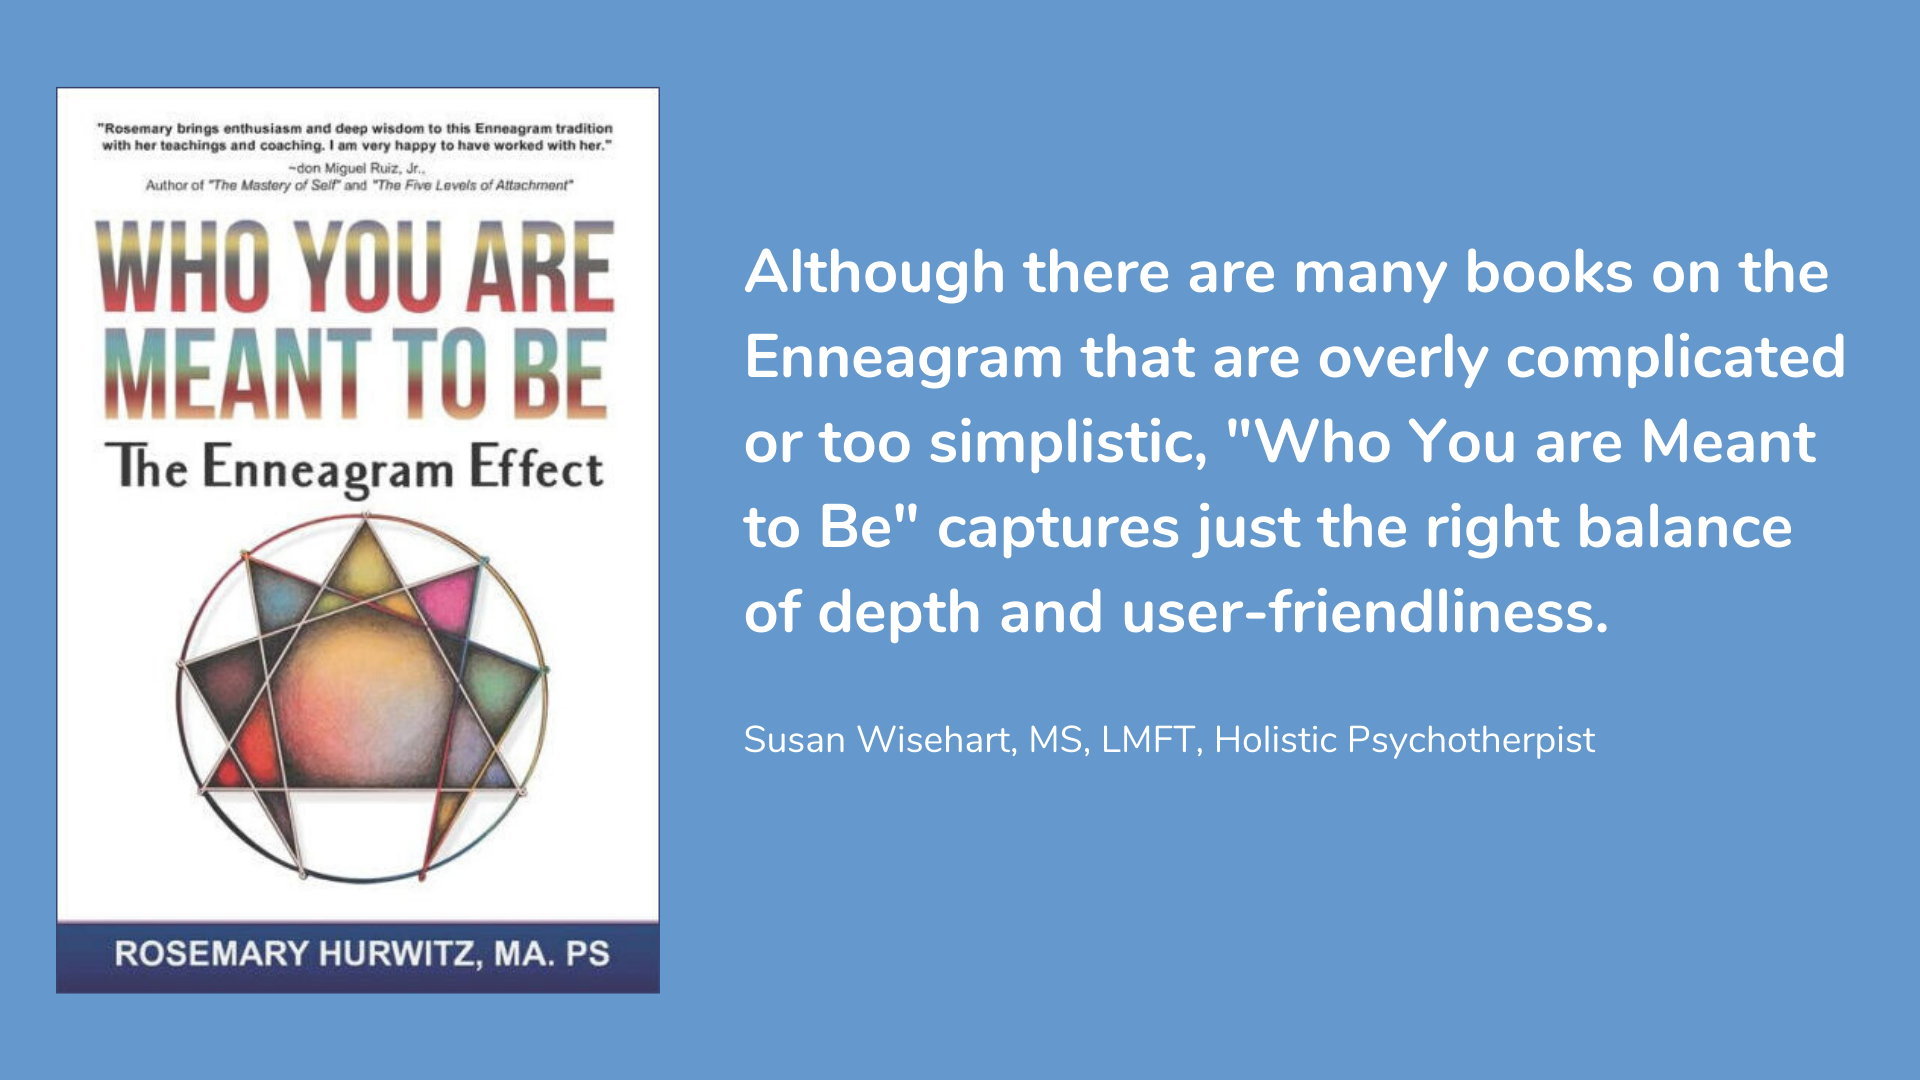 Who You Are Meant To Be: The Enneagram Effect